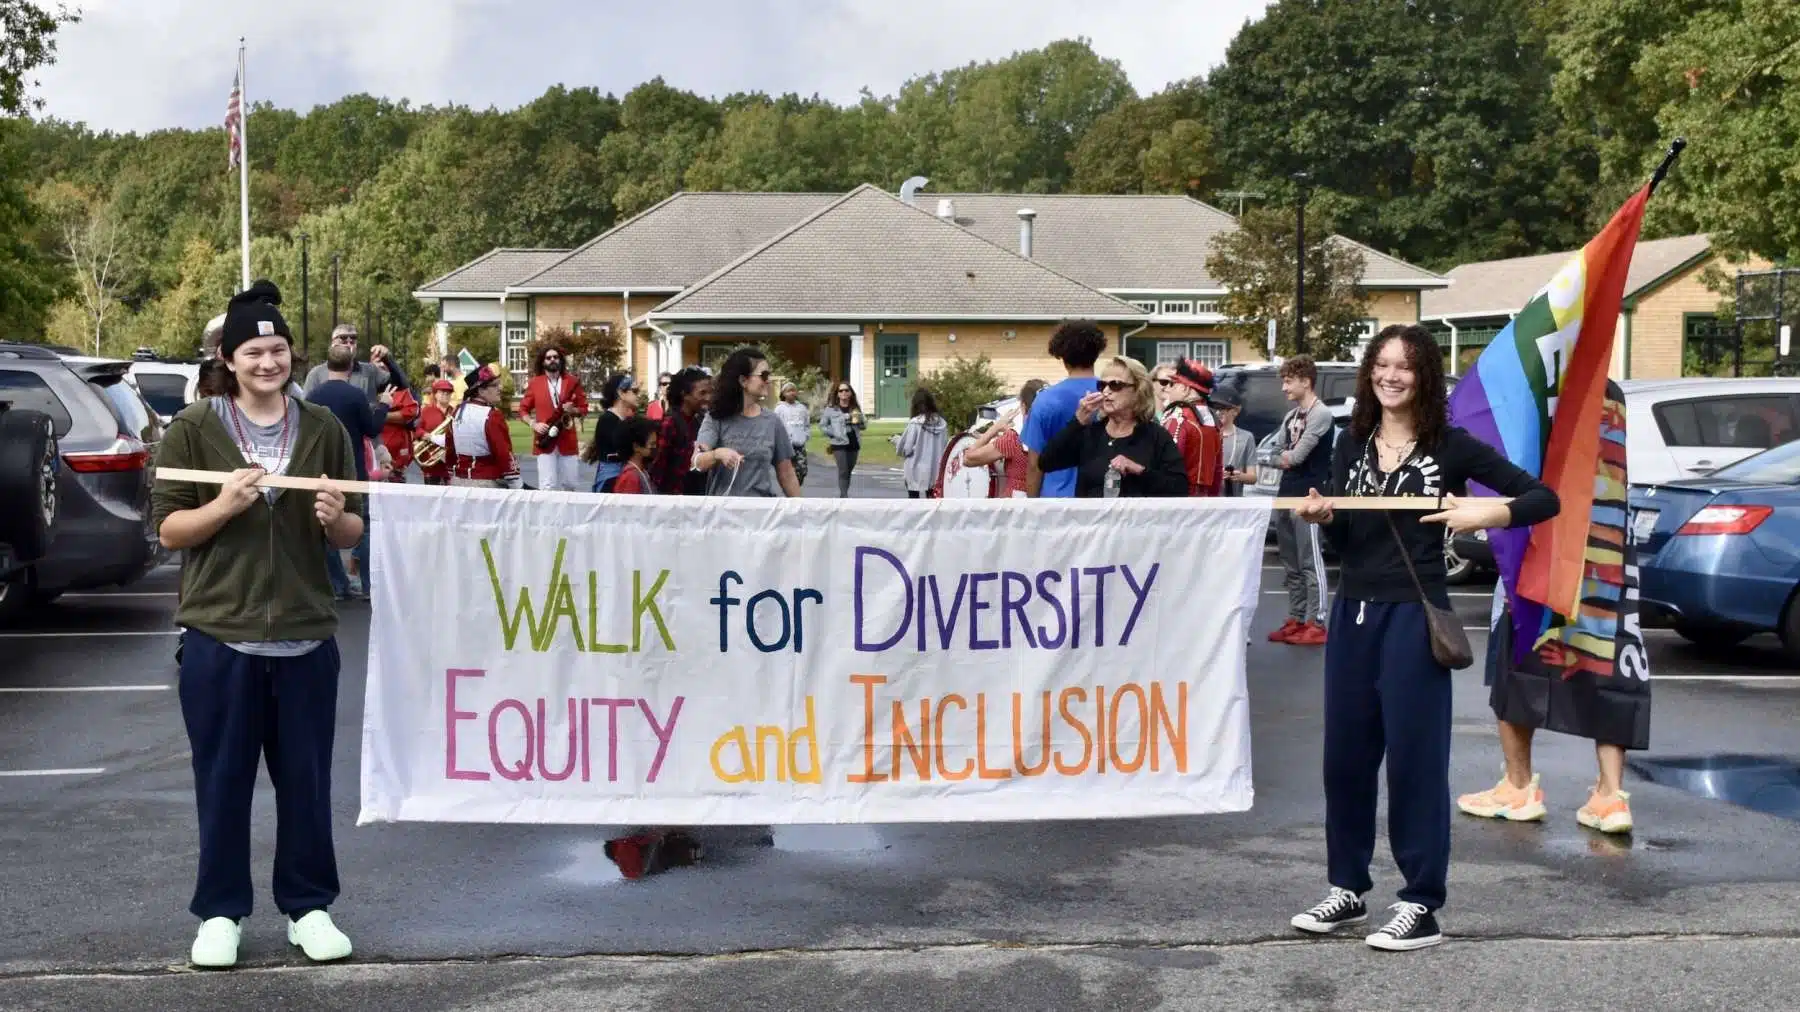 Rhode Island News: Smithfield’s Walk for Diversity, Equity and Inclusion